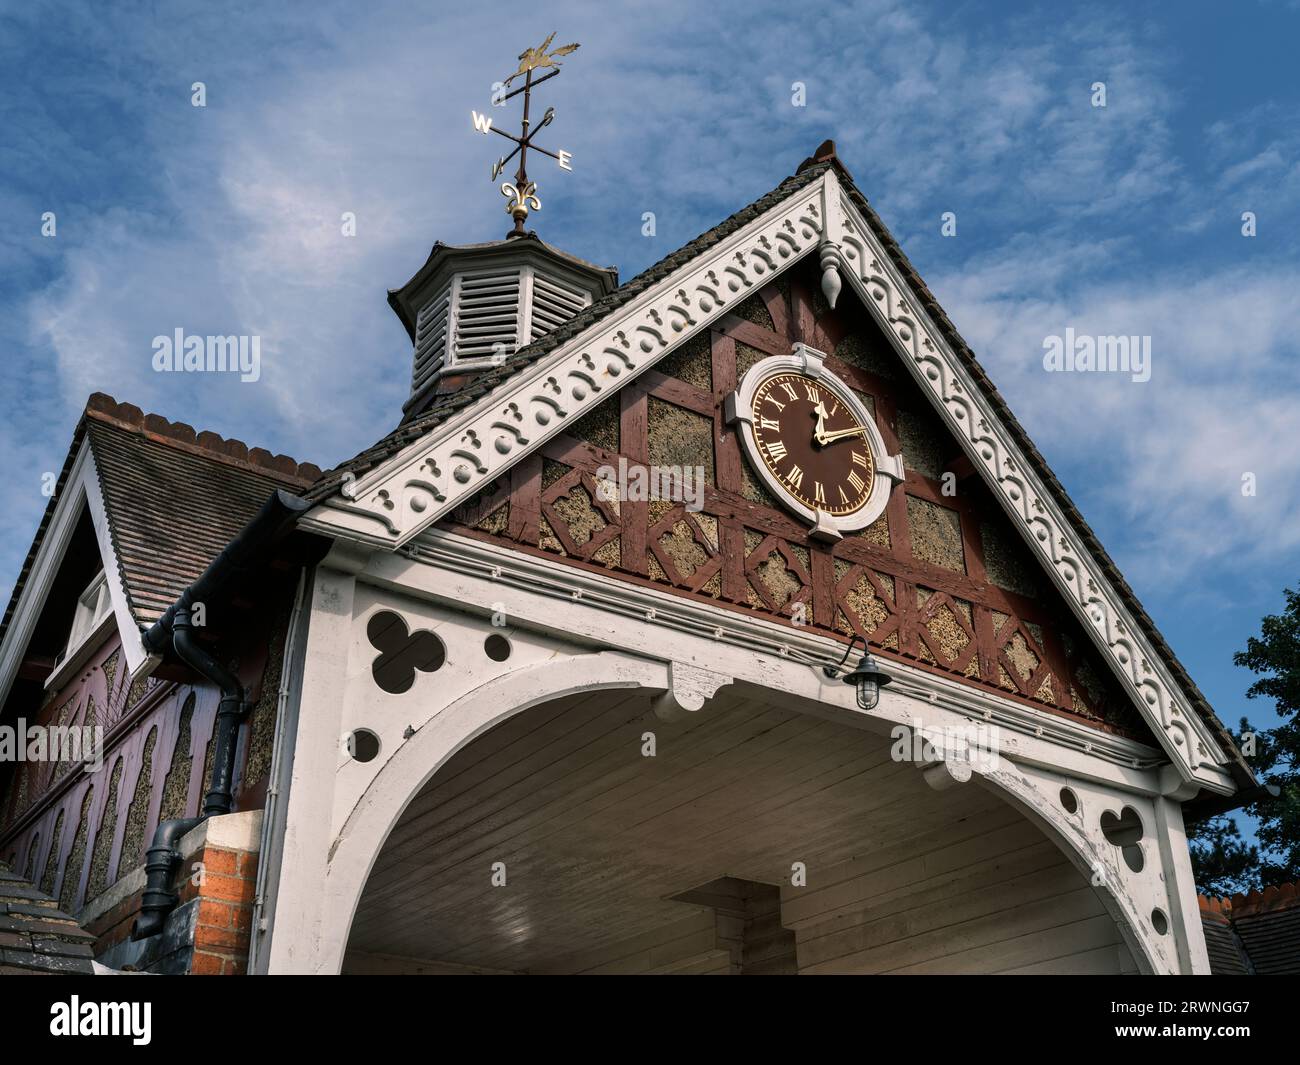 The archway and entrance to the Stableyard at Bletchley Park. Known as 'Station X', Bletchley Park was home to the code-breakers, Alistair Denniston, Stock Photo